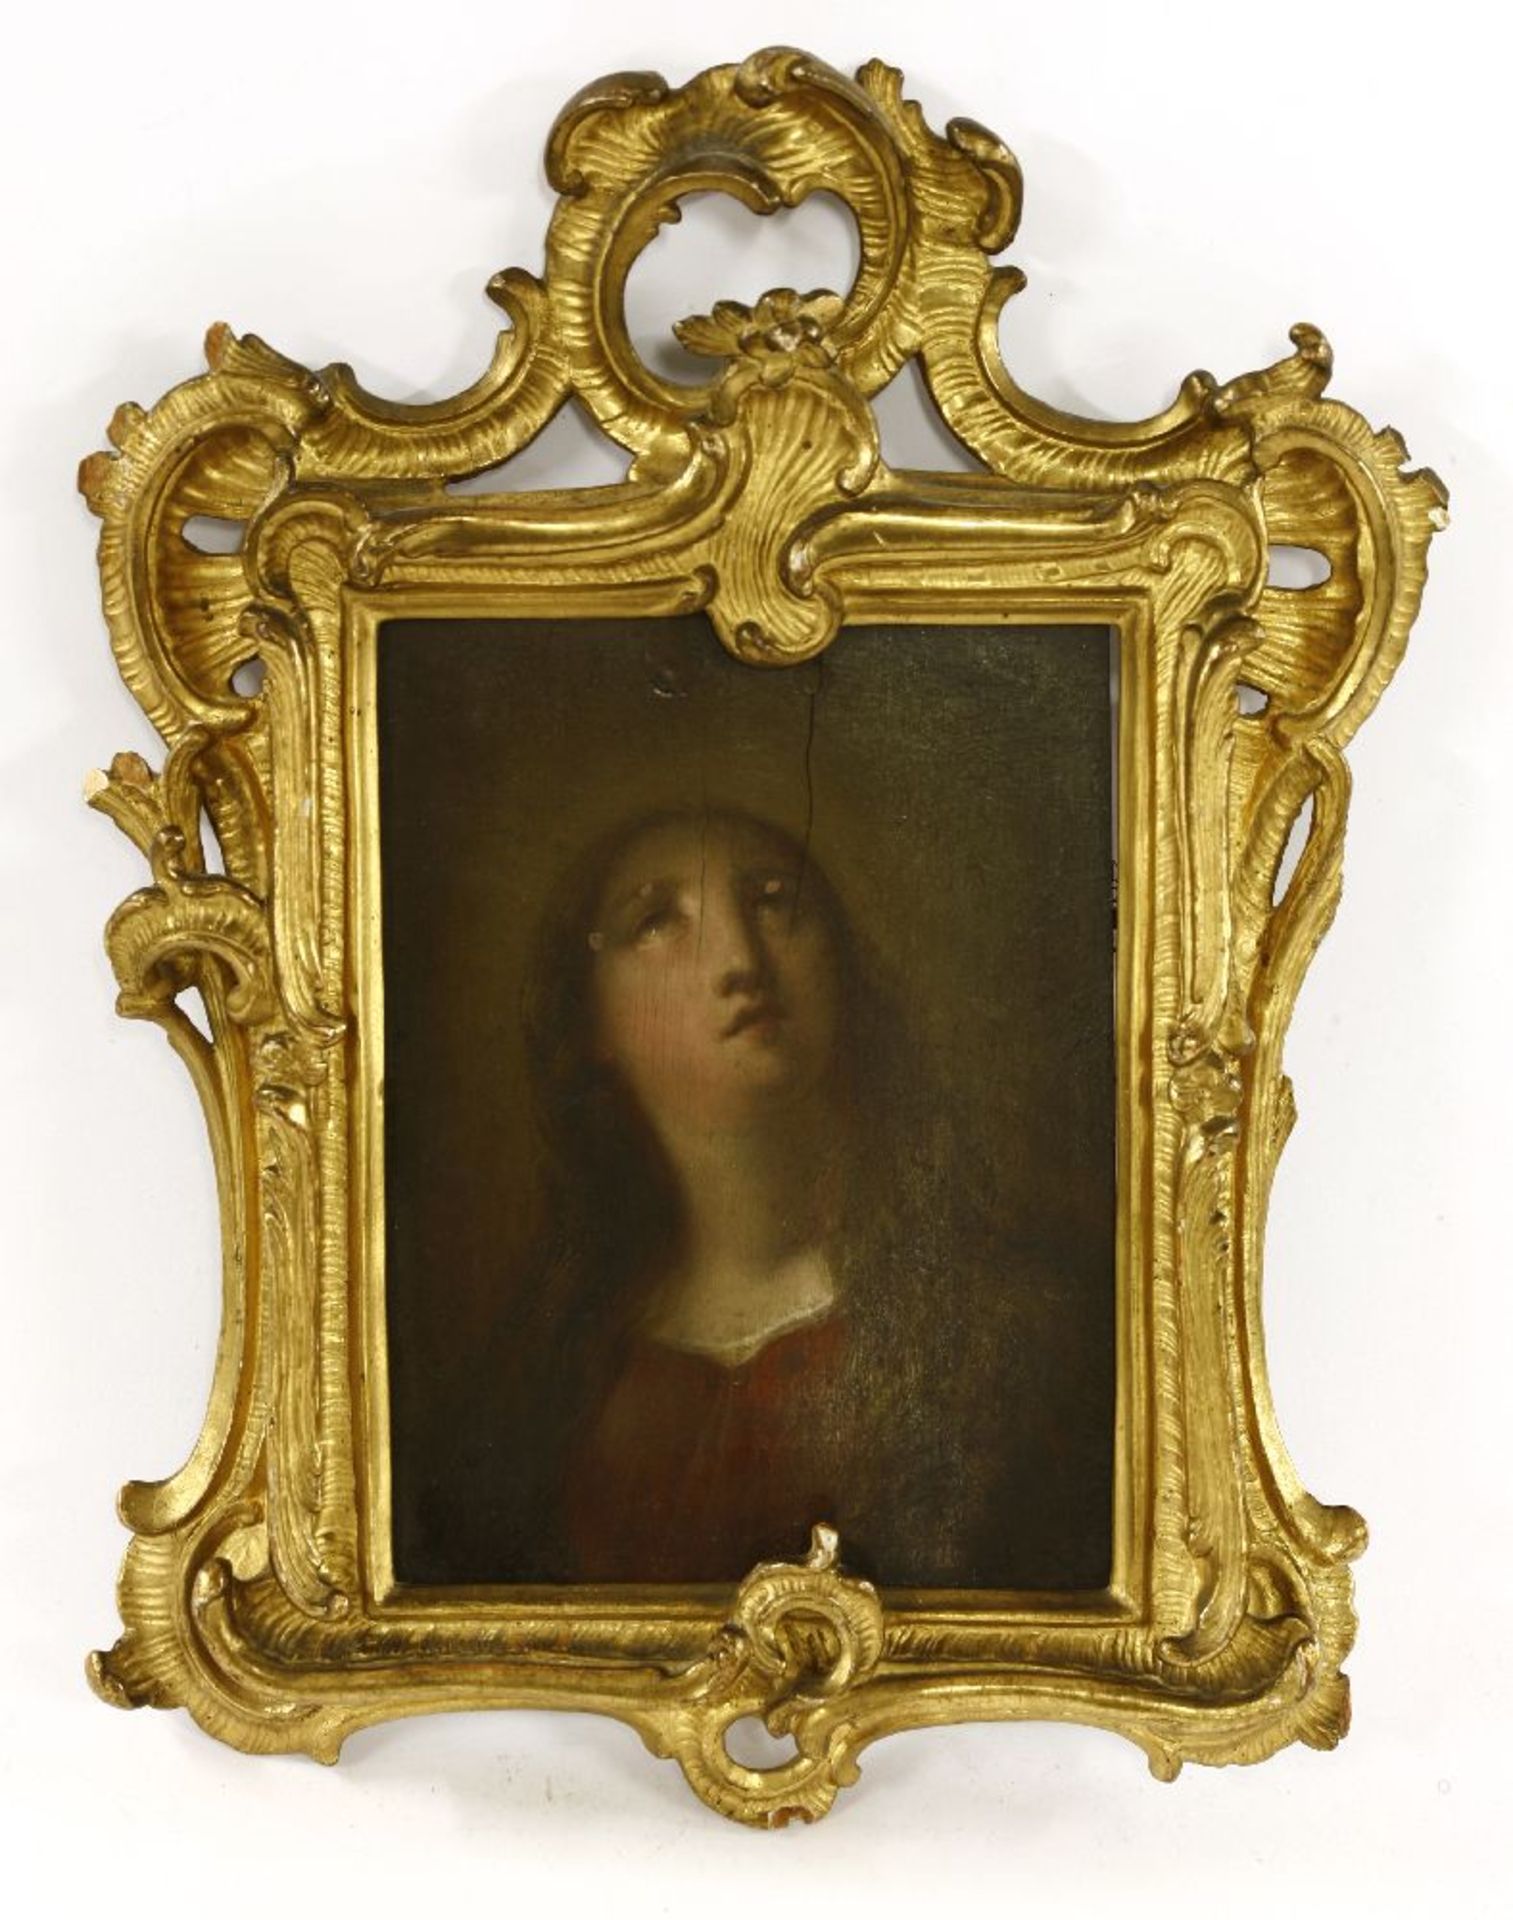 Manner of Guido ReniA FEMALE SAINTOil on panel15 x 11cm, in a carved giltwood rococo frame